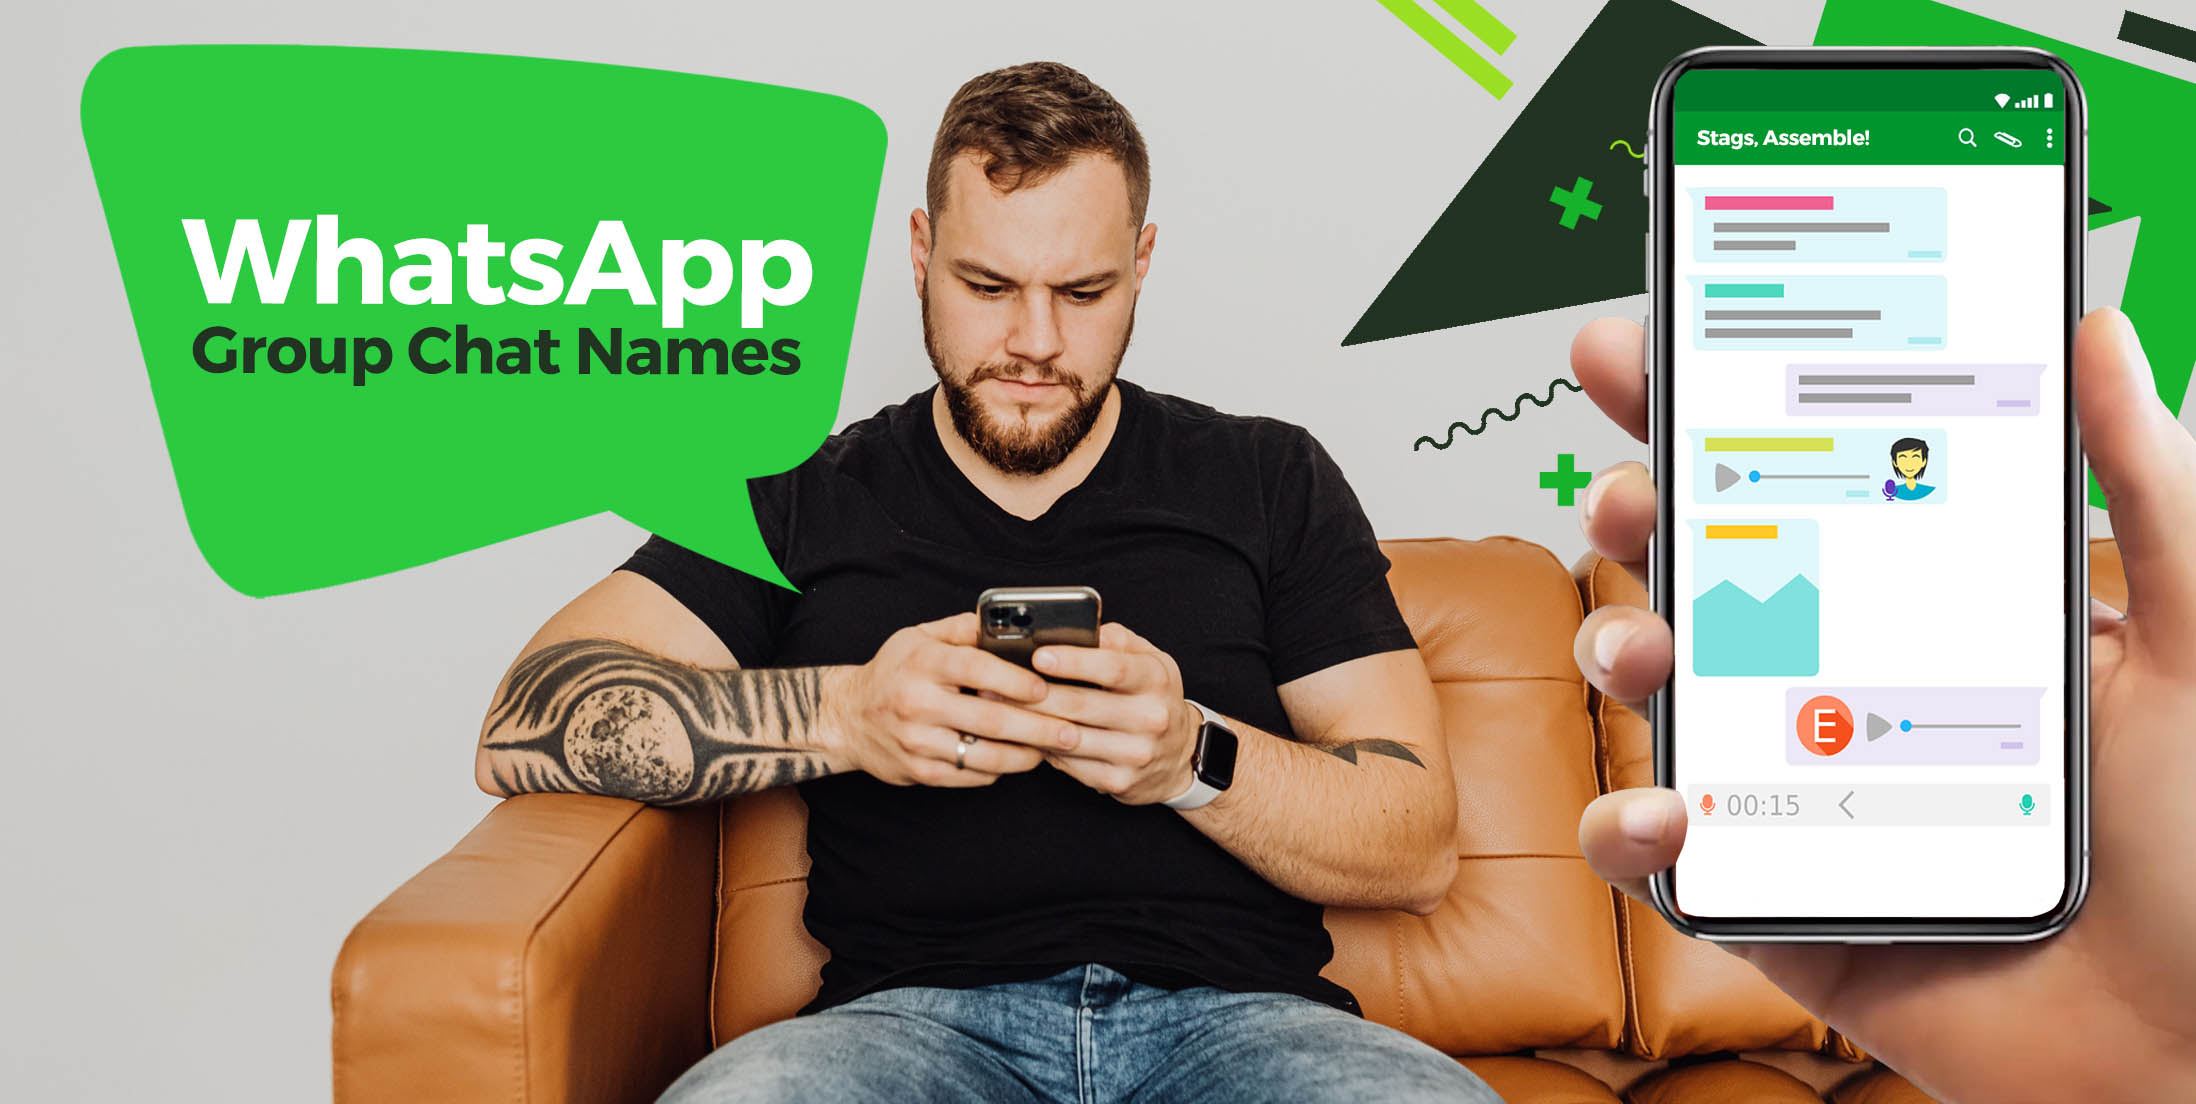 25 Funny WhatsApp Group Chat Names for Stag Do's